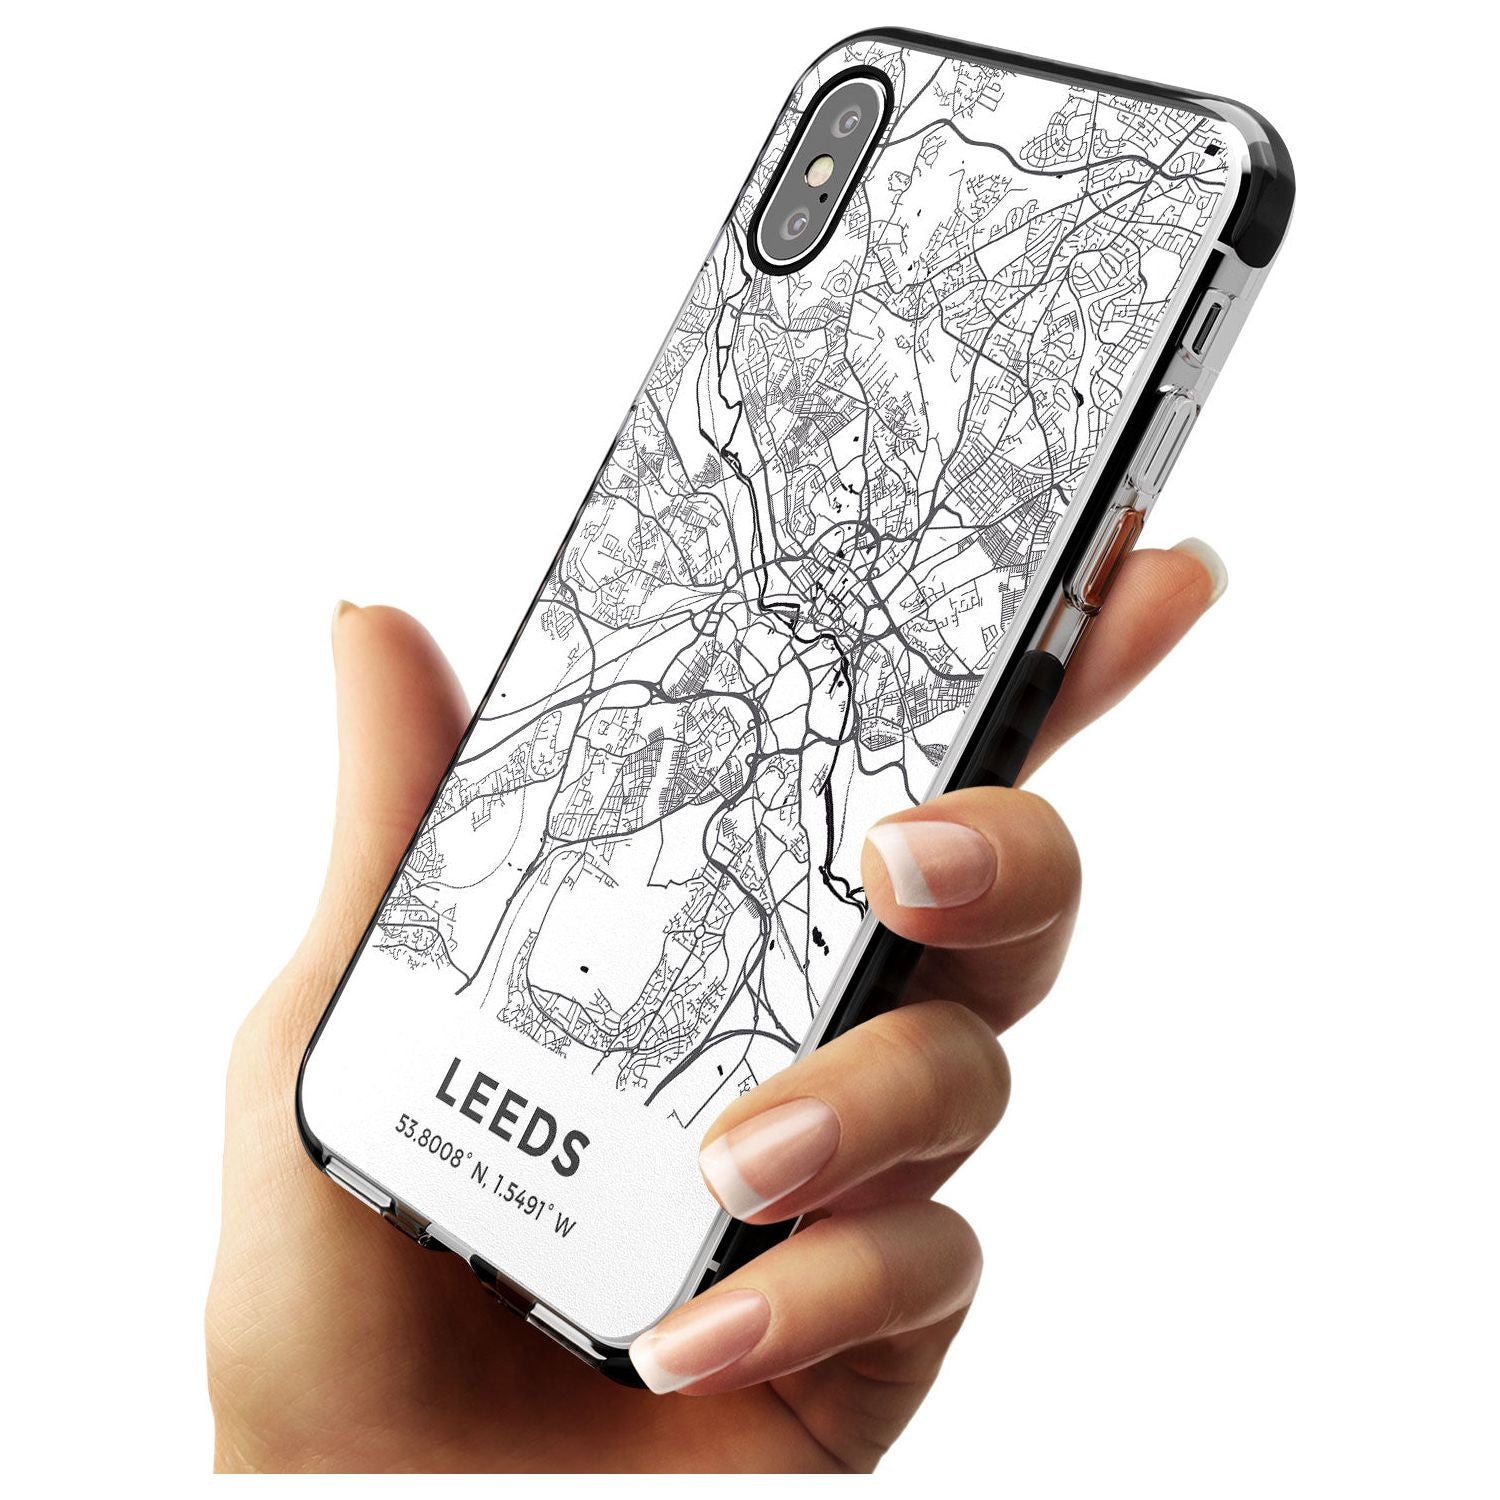 Map of Leeds, England Black Impact Phone Case for iPhone X XS Max XR